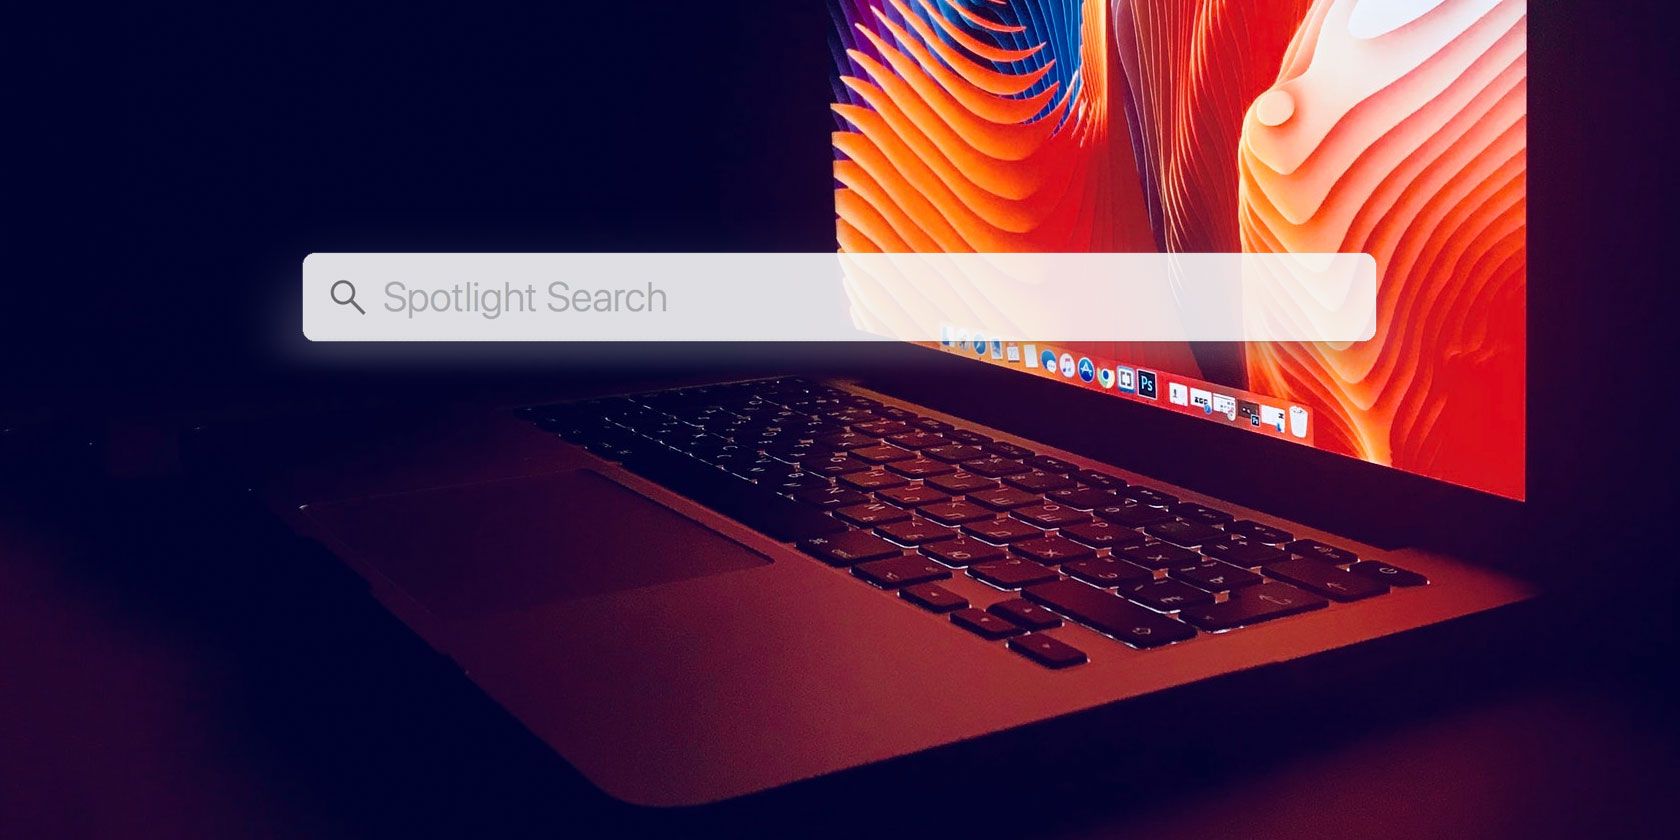 Spotlight search bar in front of a MacBook